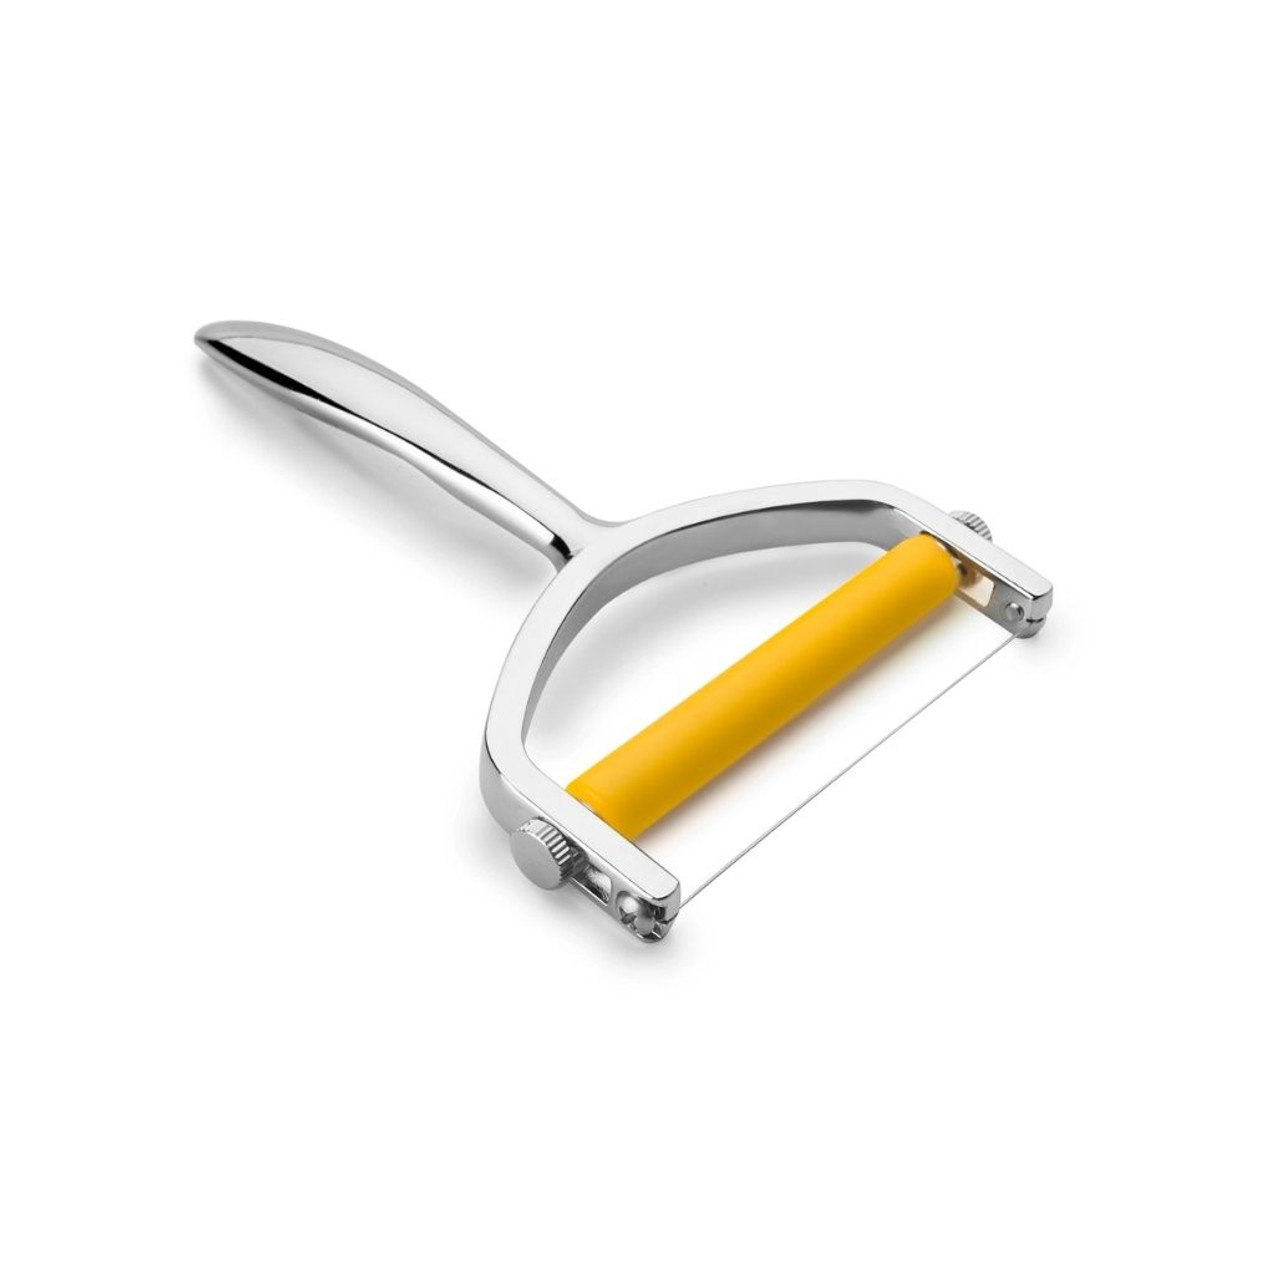 Cheese Slicer With Wire Stainless Steel Cutter For Hard And Semi